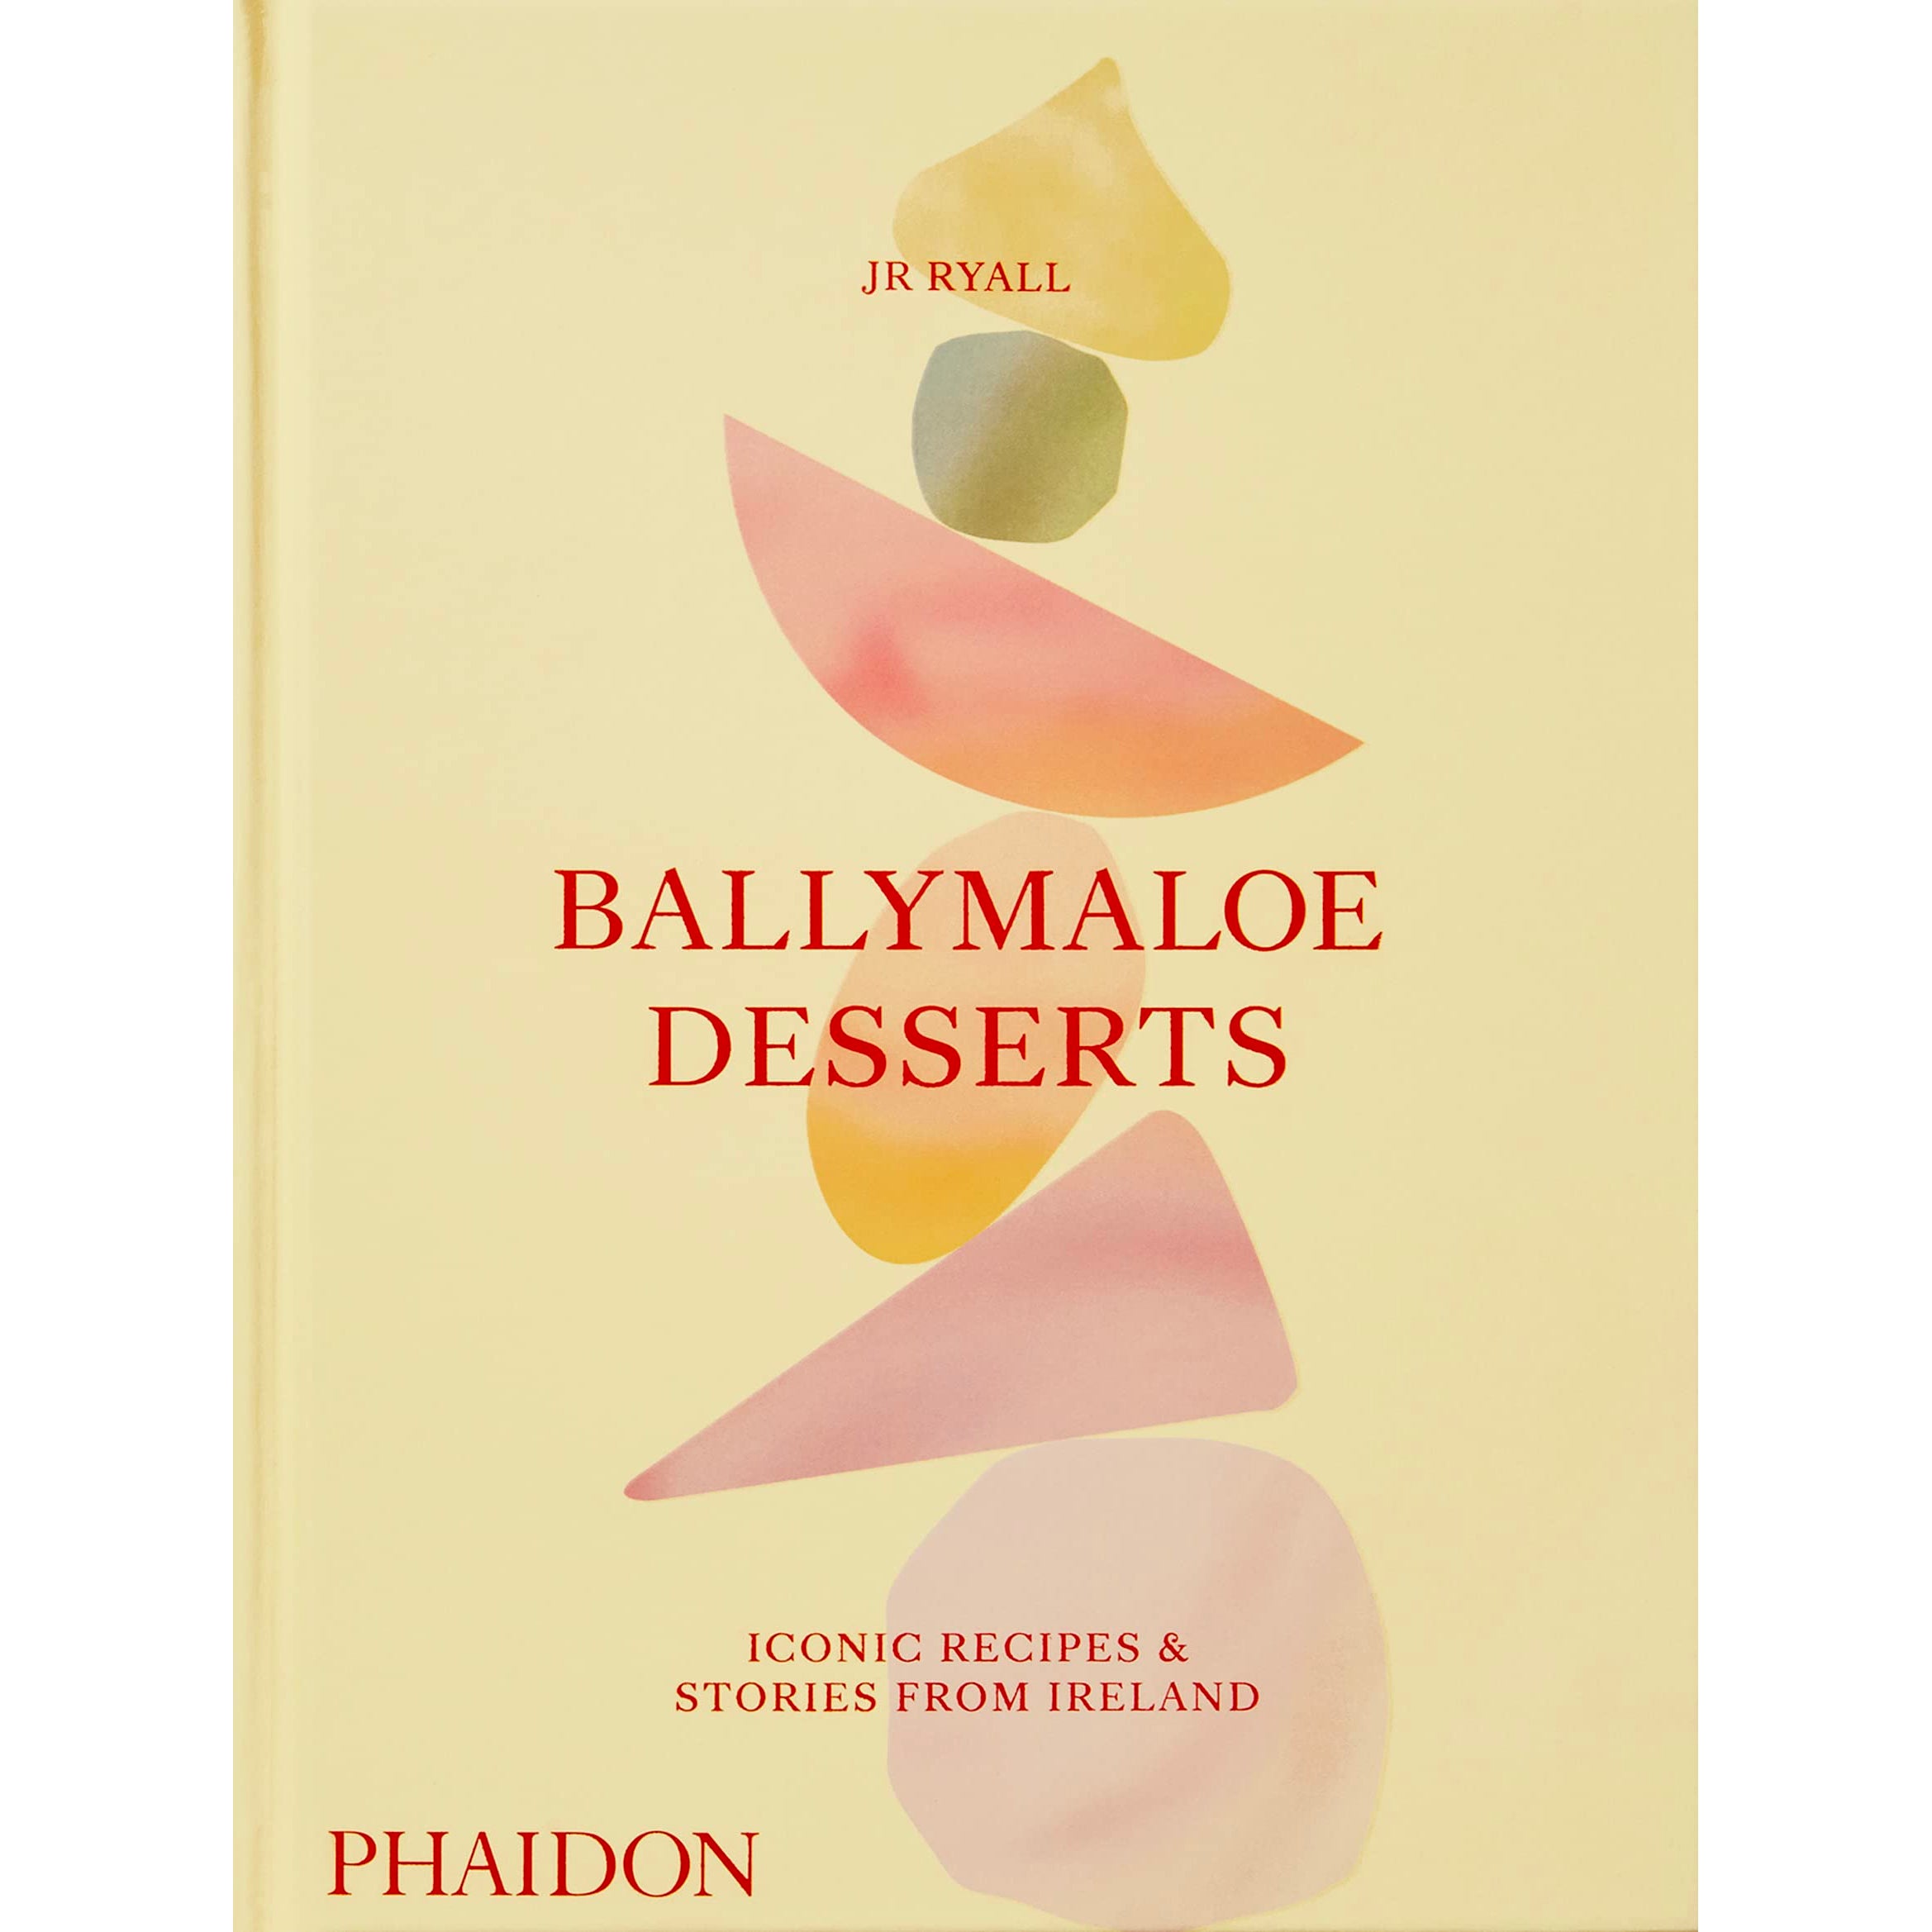 Ballymaloe Desserts book cover –featuring pastel geometric shapes against an off-white background– against a white background.